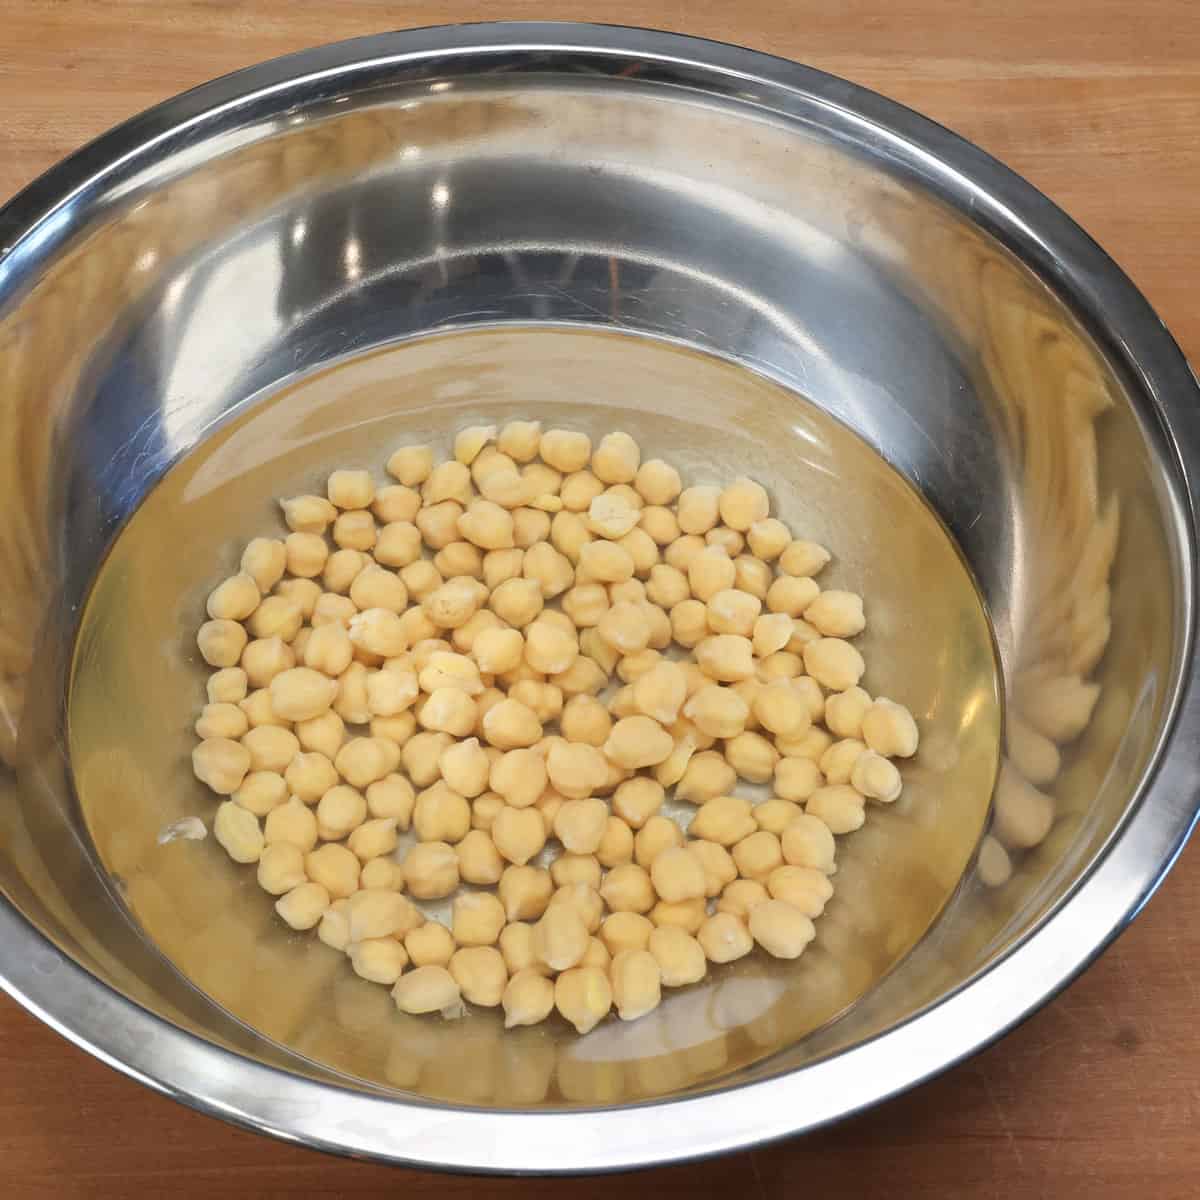 a bowl of dried chickpeas soaking in water.